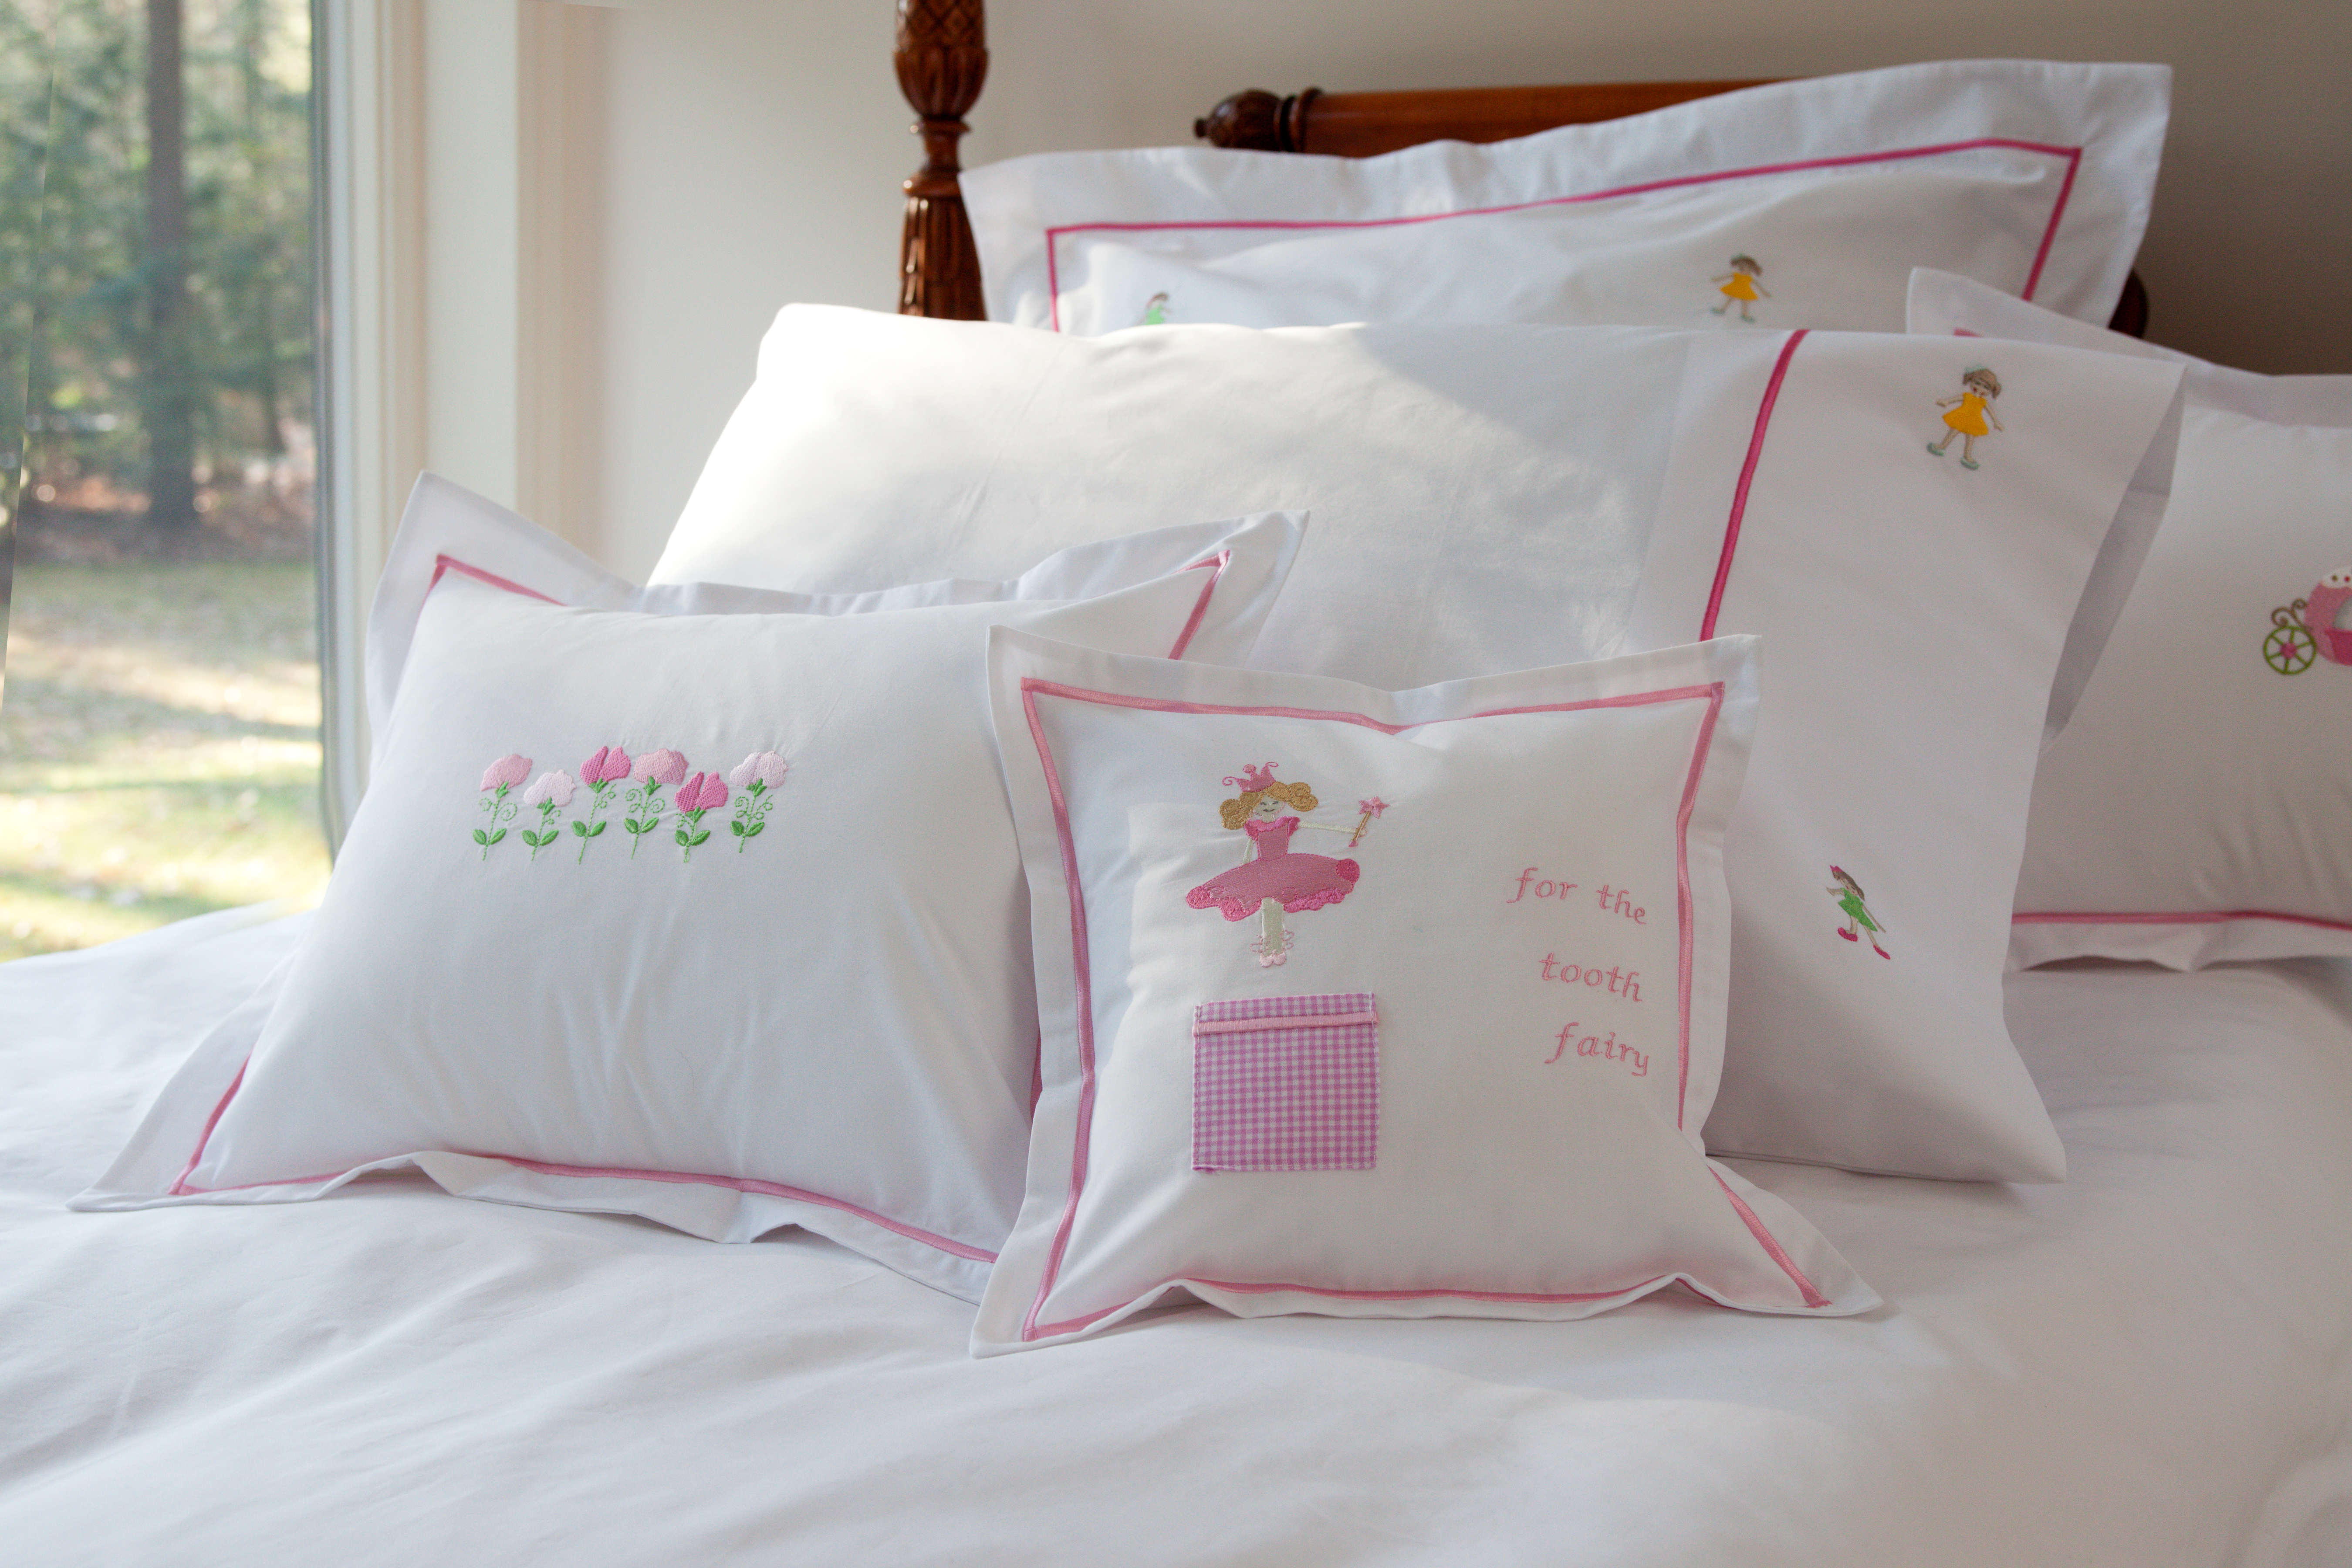 embroidered pillows on a child's bed